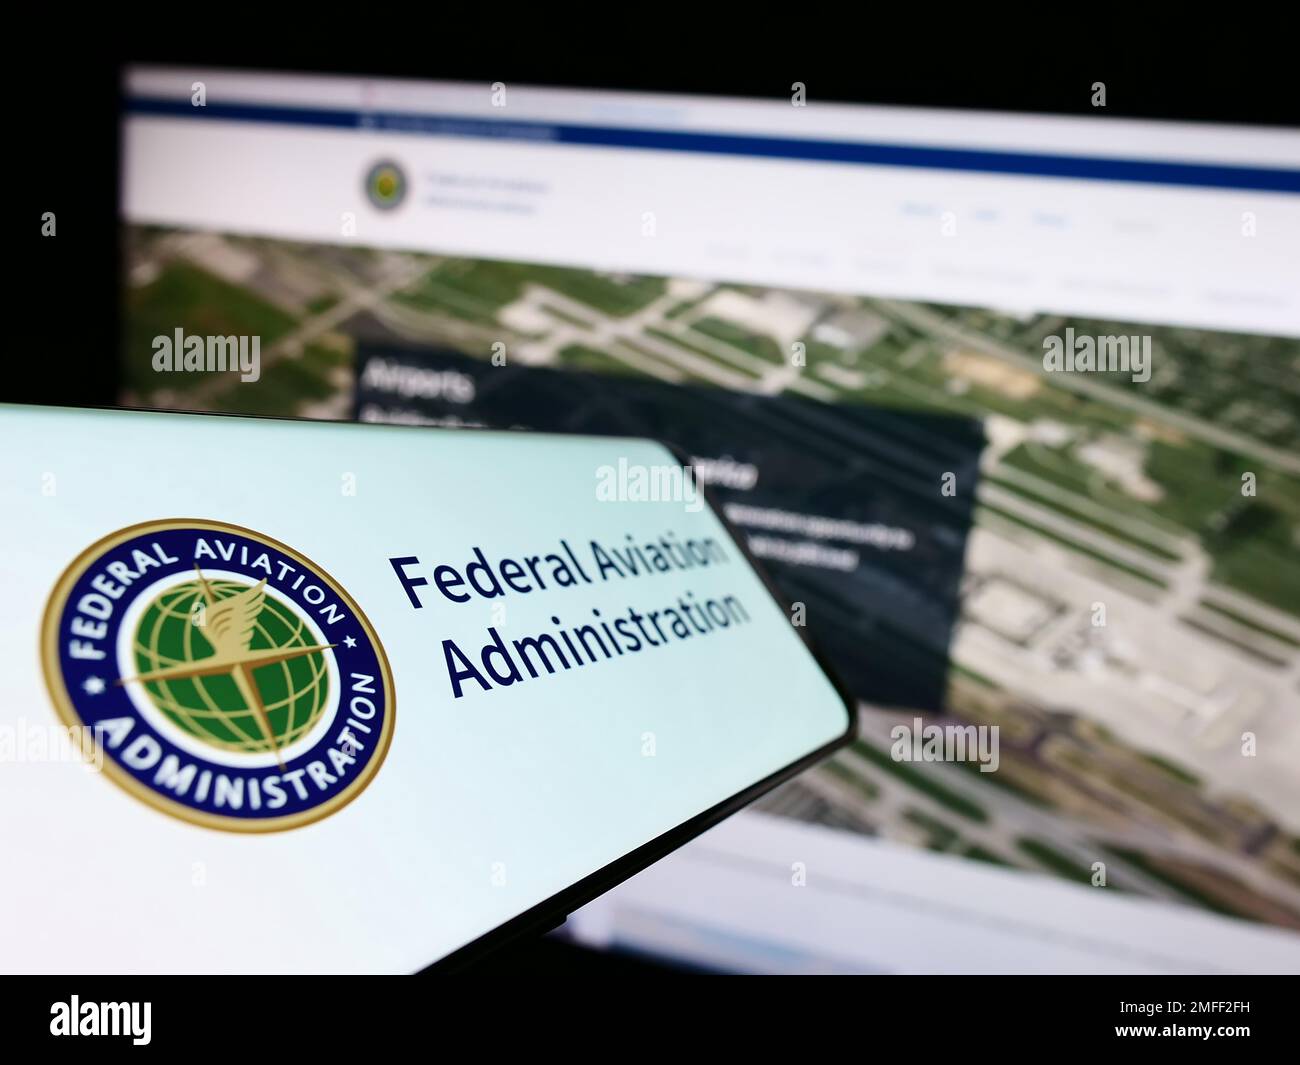 Cellphone with seal of US Federal Aviation Administration (FAA) on screen in front of website. Focus on center-left of phone display. Stock Photo